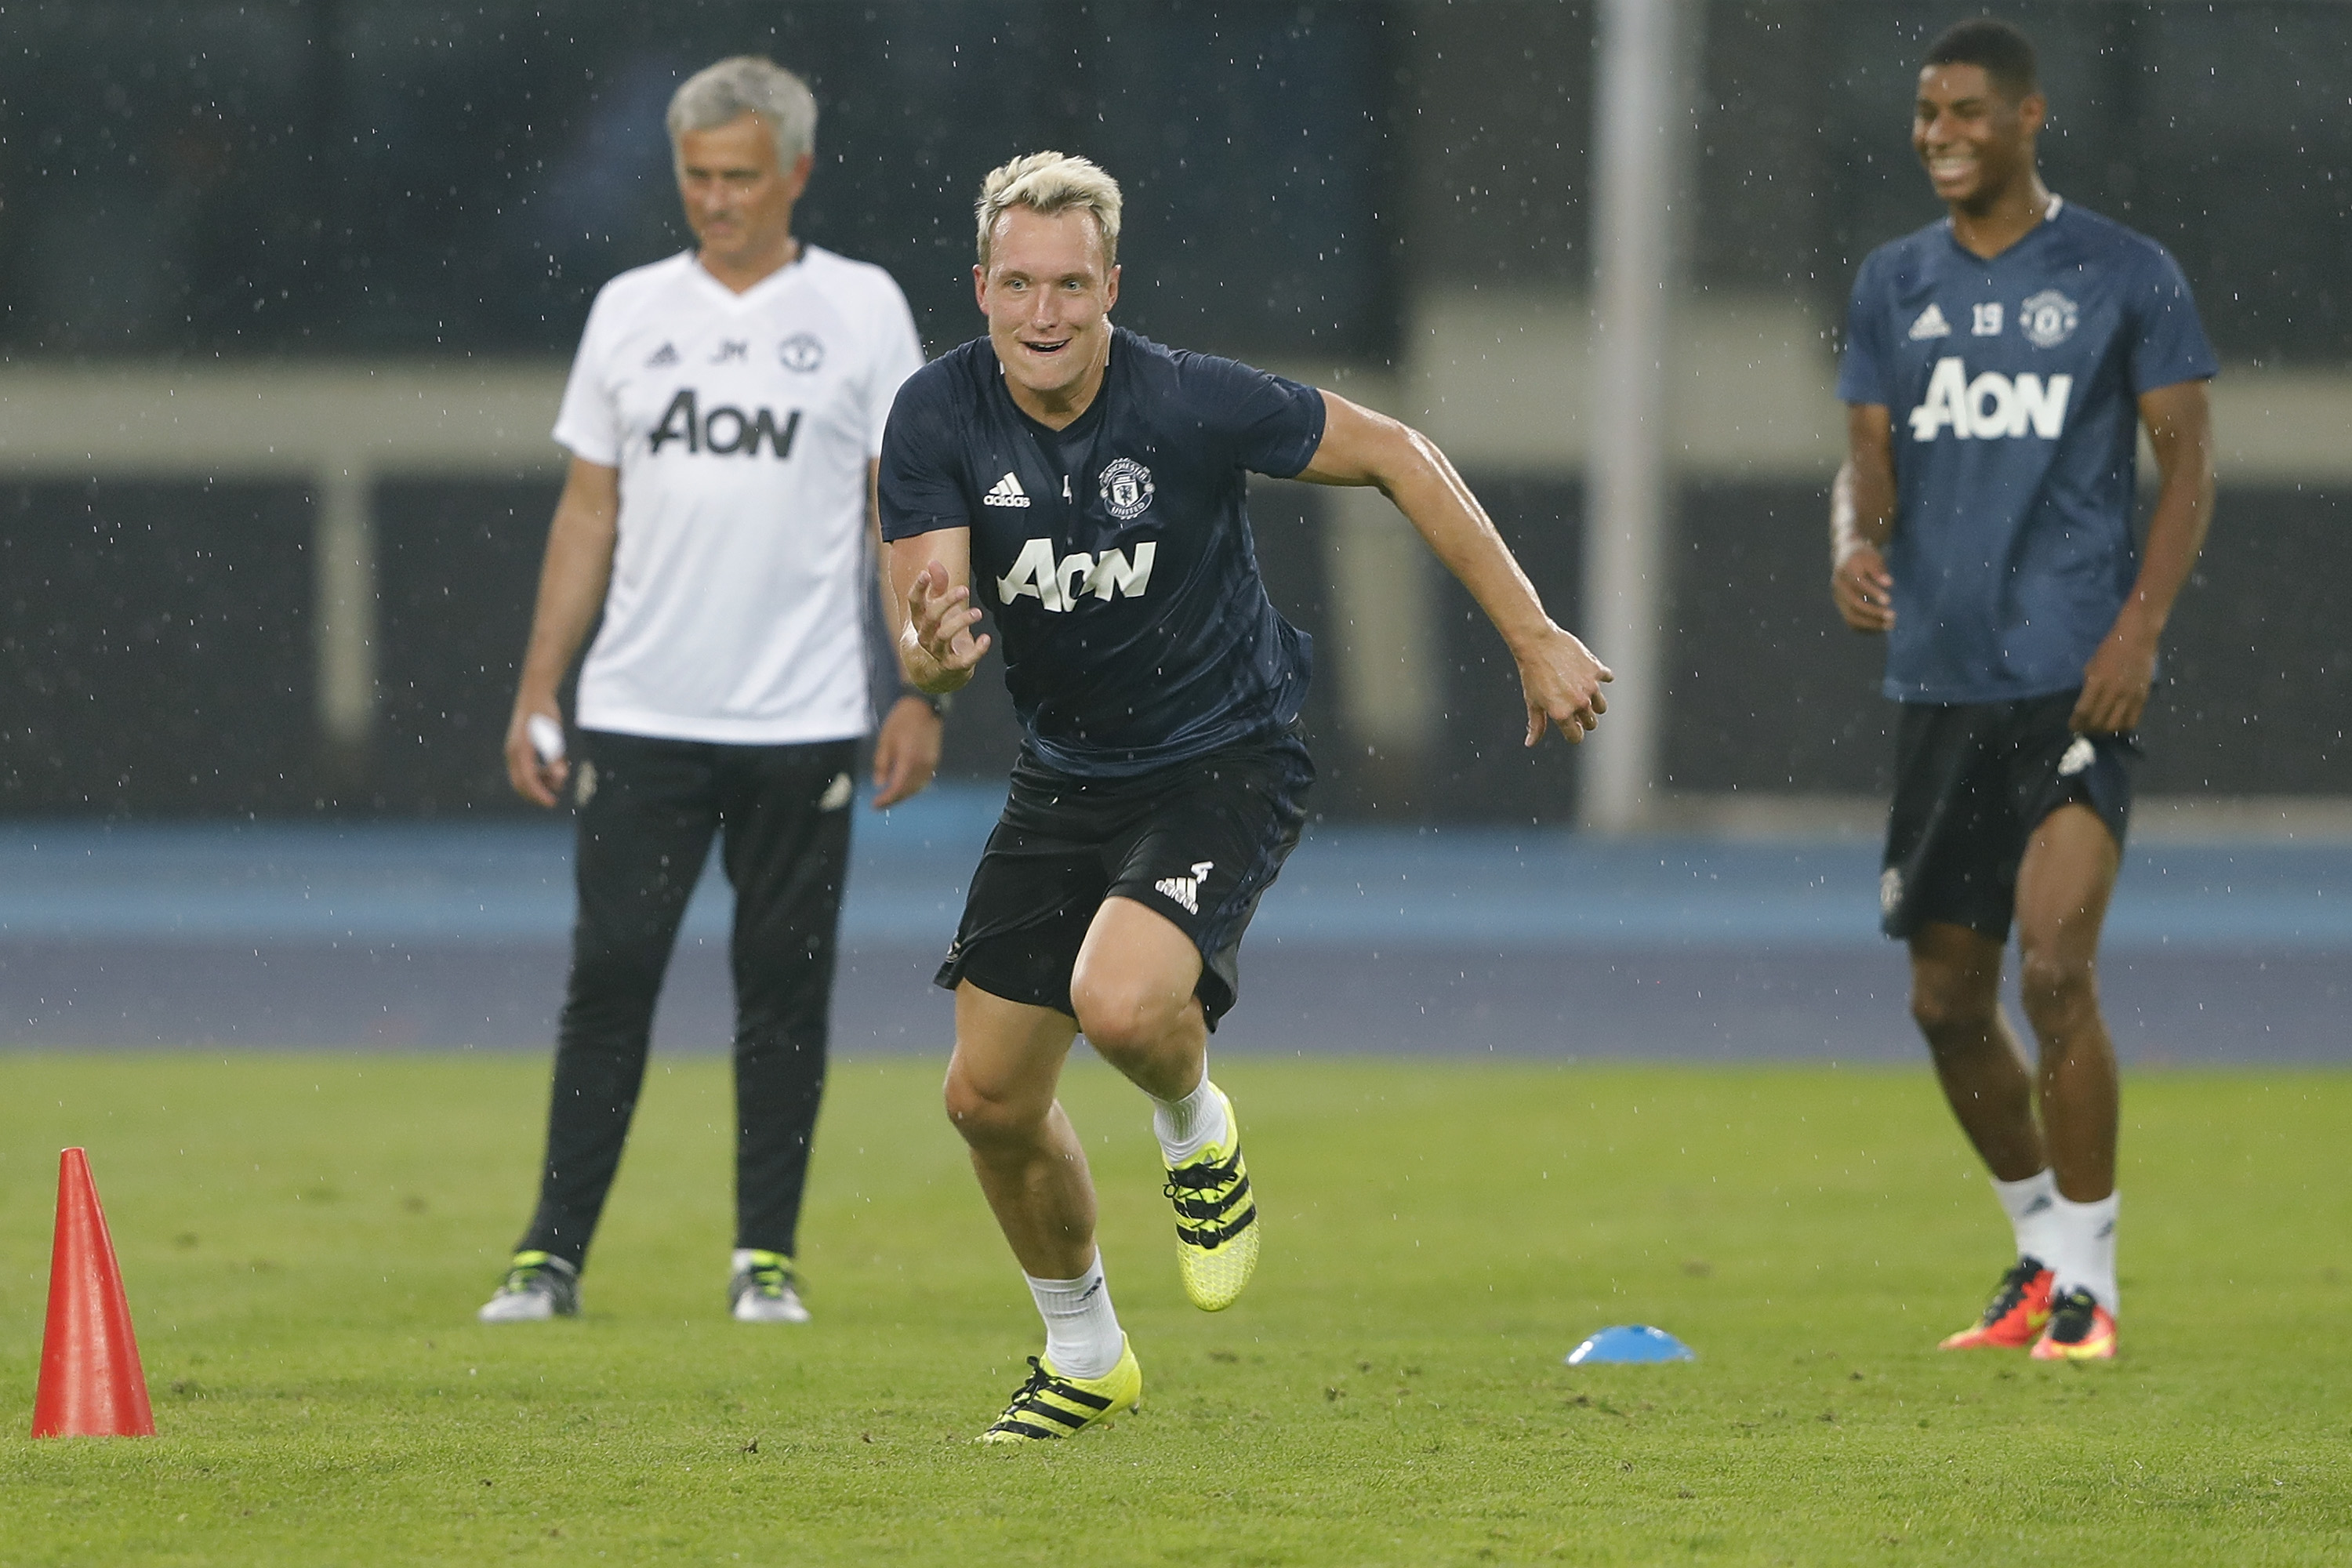 BEIJING, CHINA - JULY 24: Phil Jones of Manchester United in action  during the team training session for the 2016 International Champions Cup match between Manchester City and Manchester United at Olympic Sports Center Stadium on July 24, 2016 in Beijing, China.  (Photo by Lintao Zhang/Getty Images)